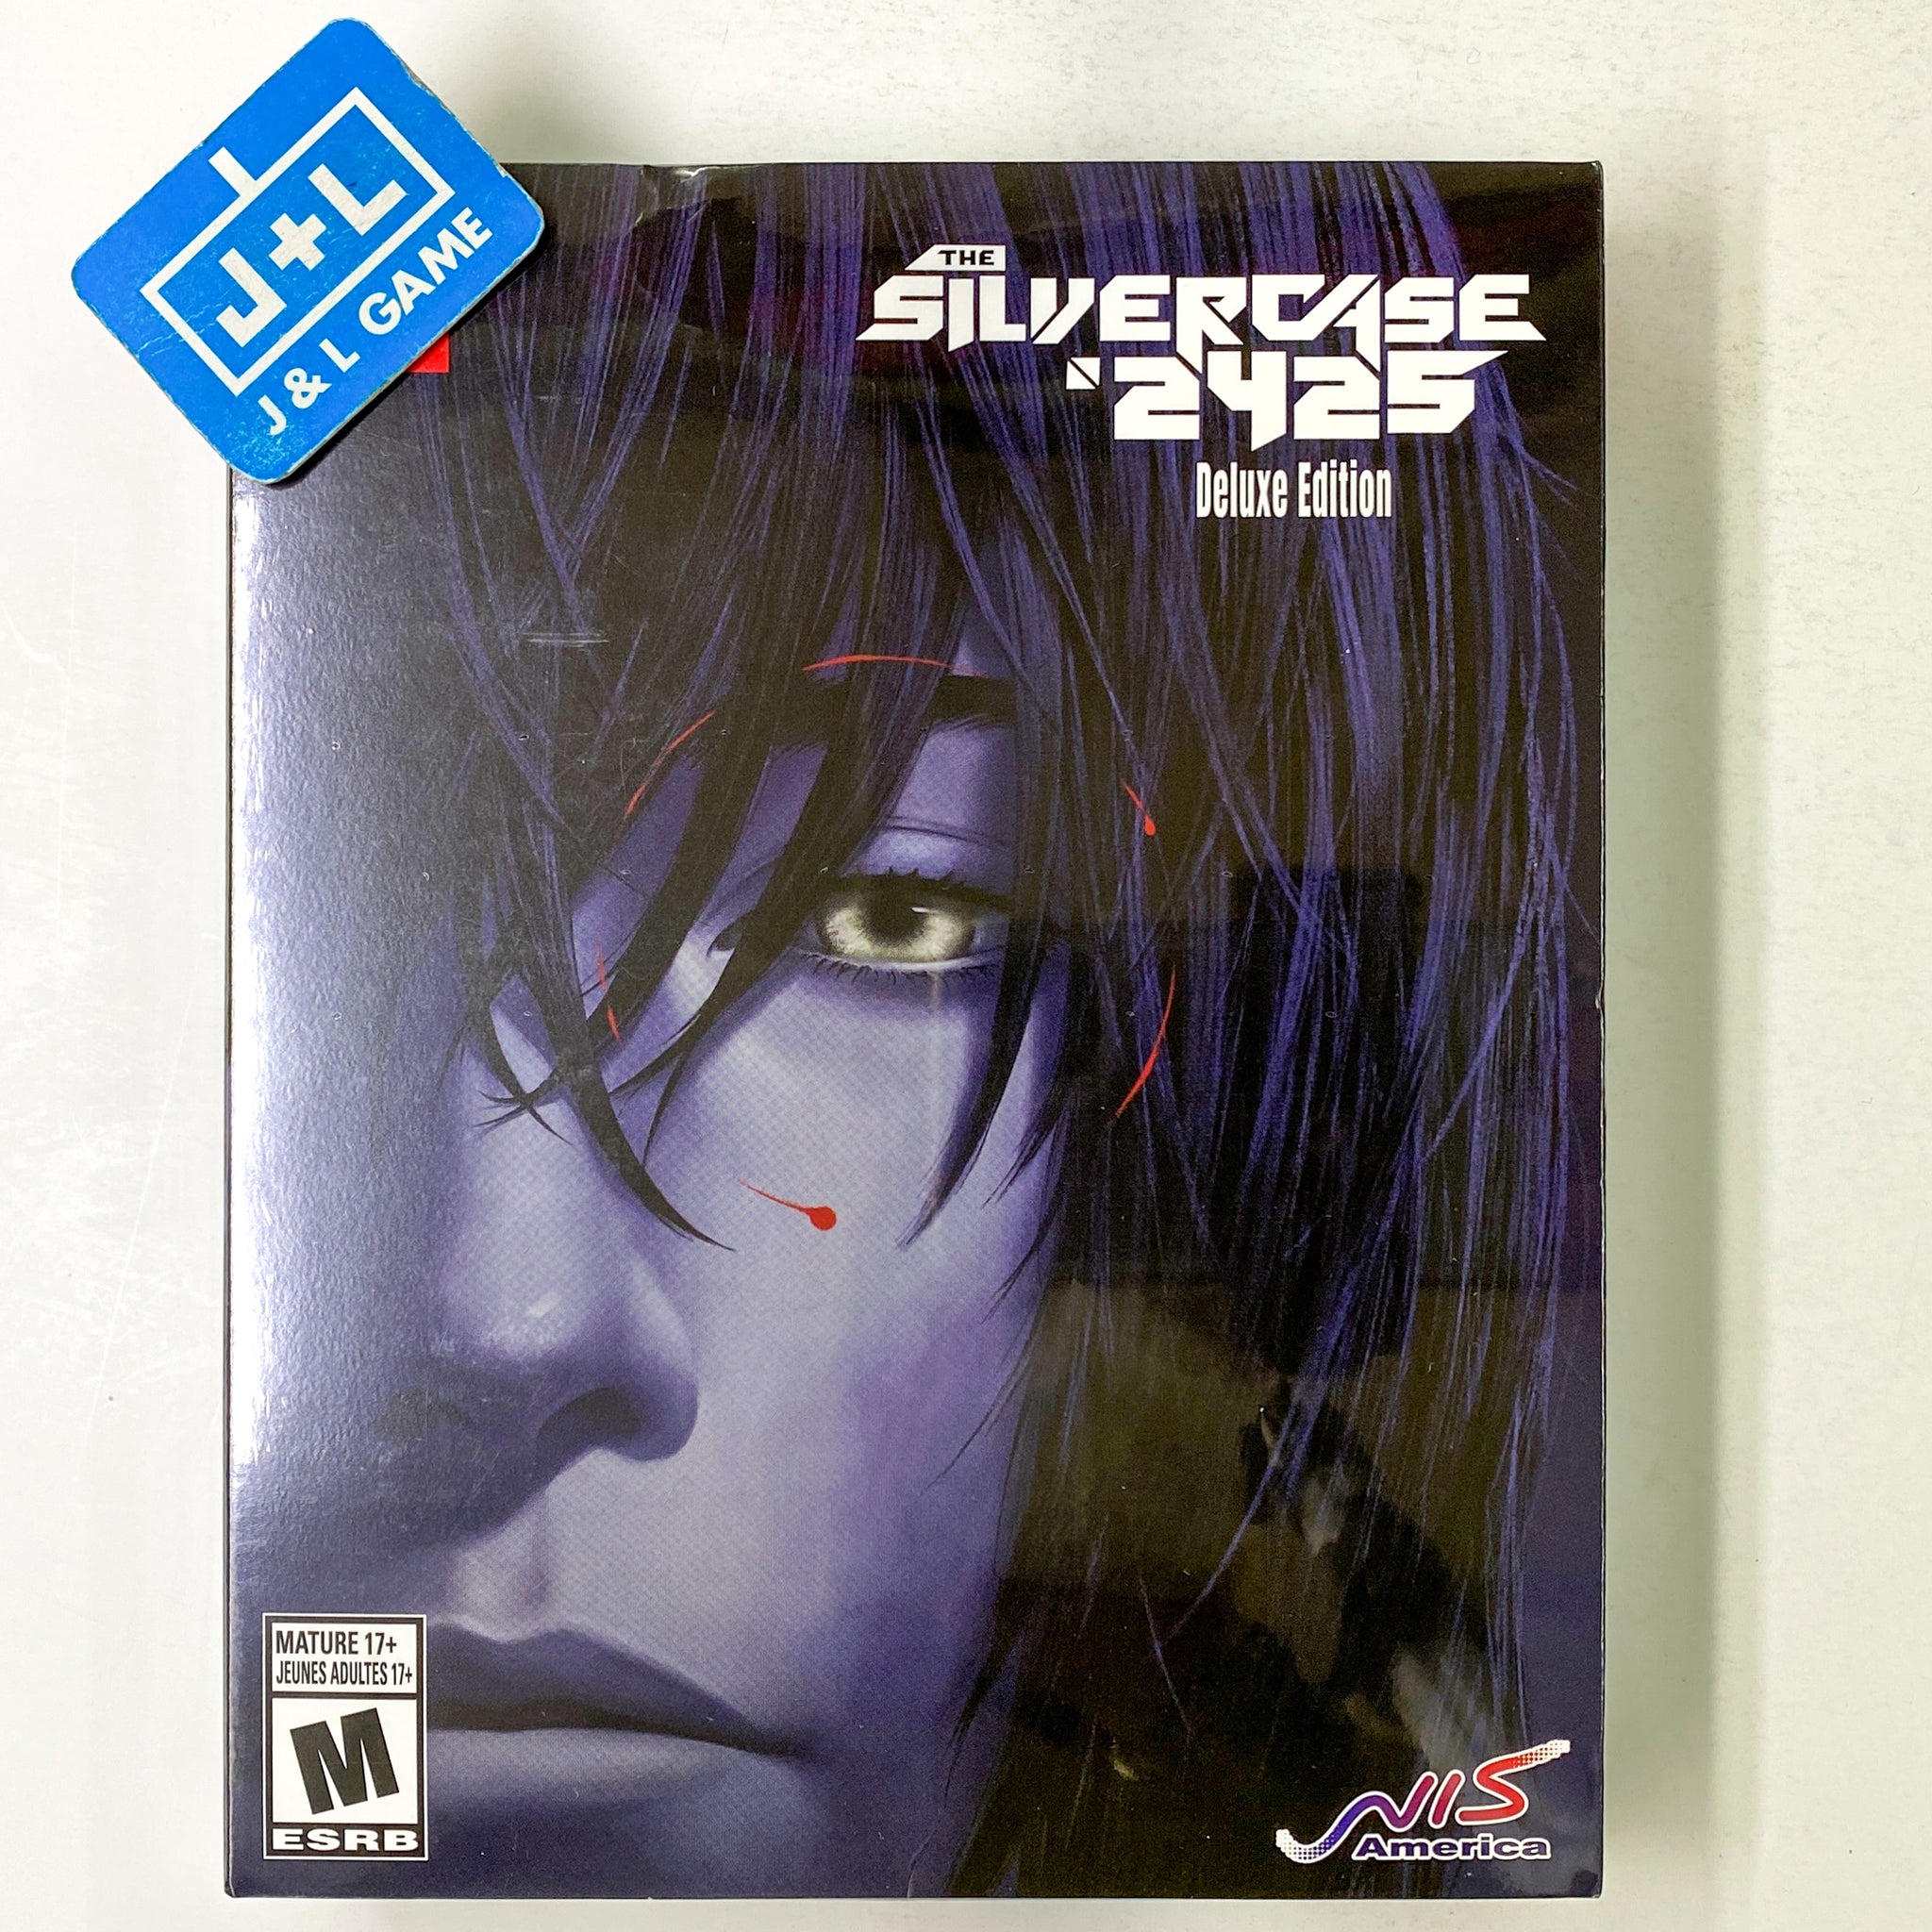 The Silver Case 2425 Deluxe Edition - (NSW) Nintendo Switch Video Games NIS America   